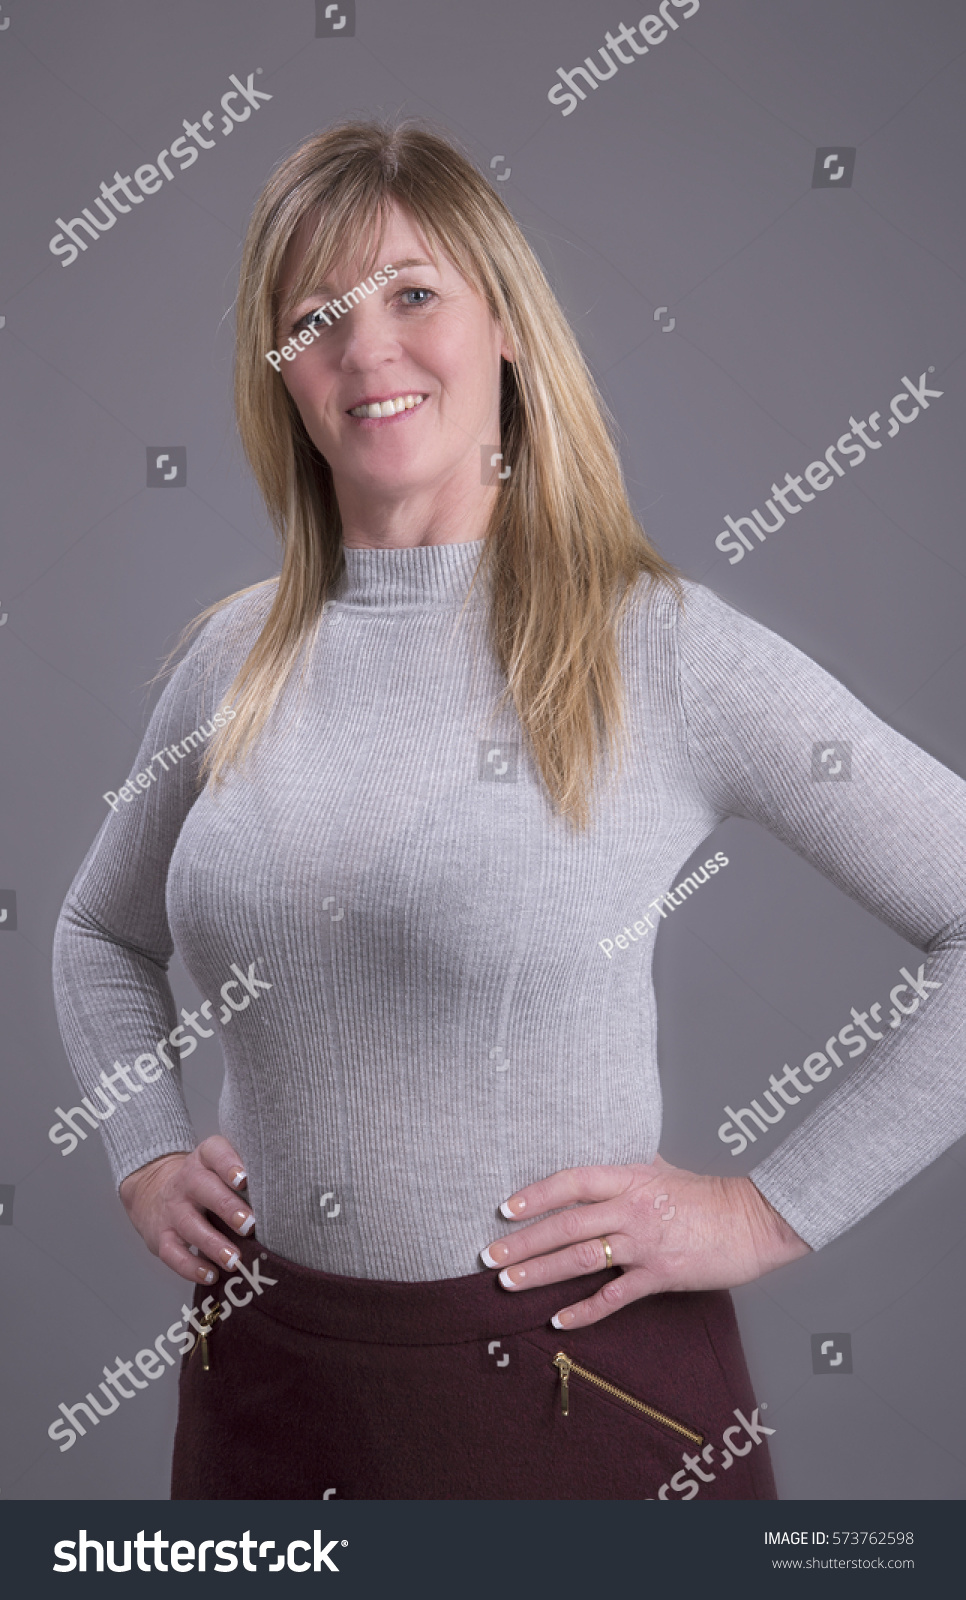 Busty older women Attractive Middle Aged Busty Woman Hands Stock Photo Edit Now 573762598